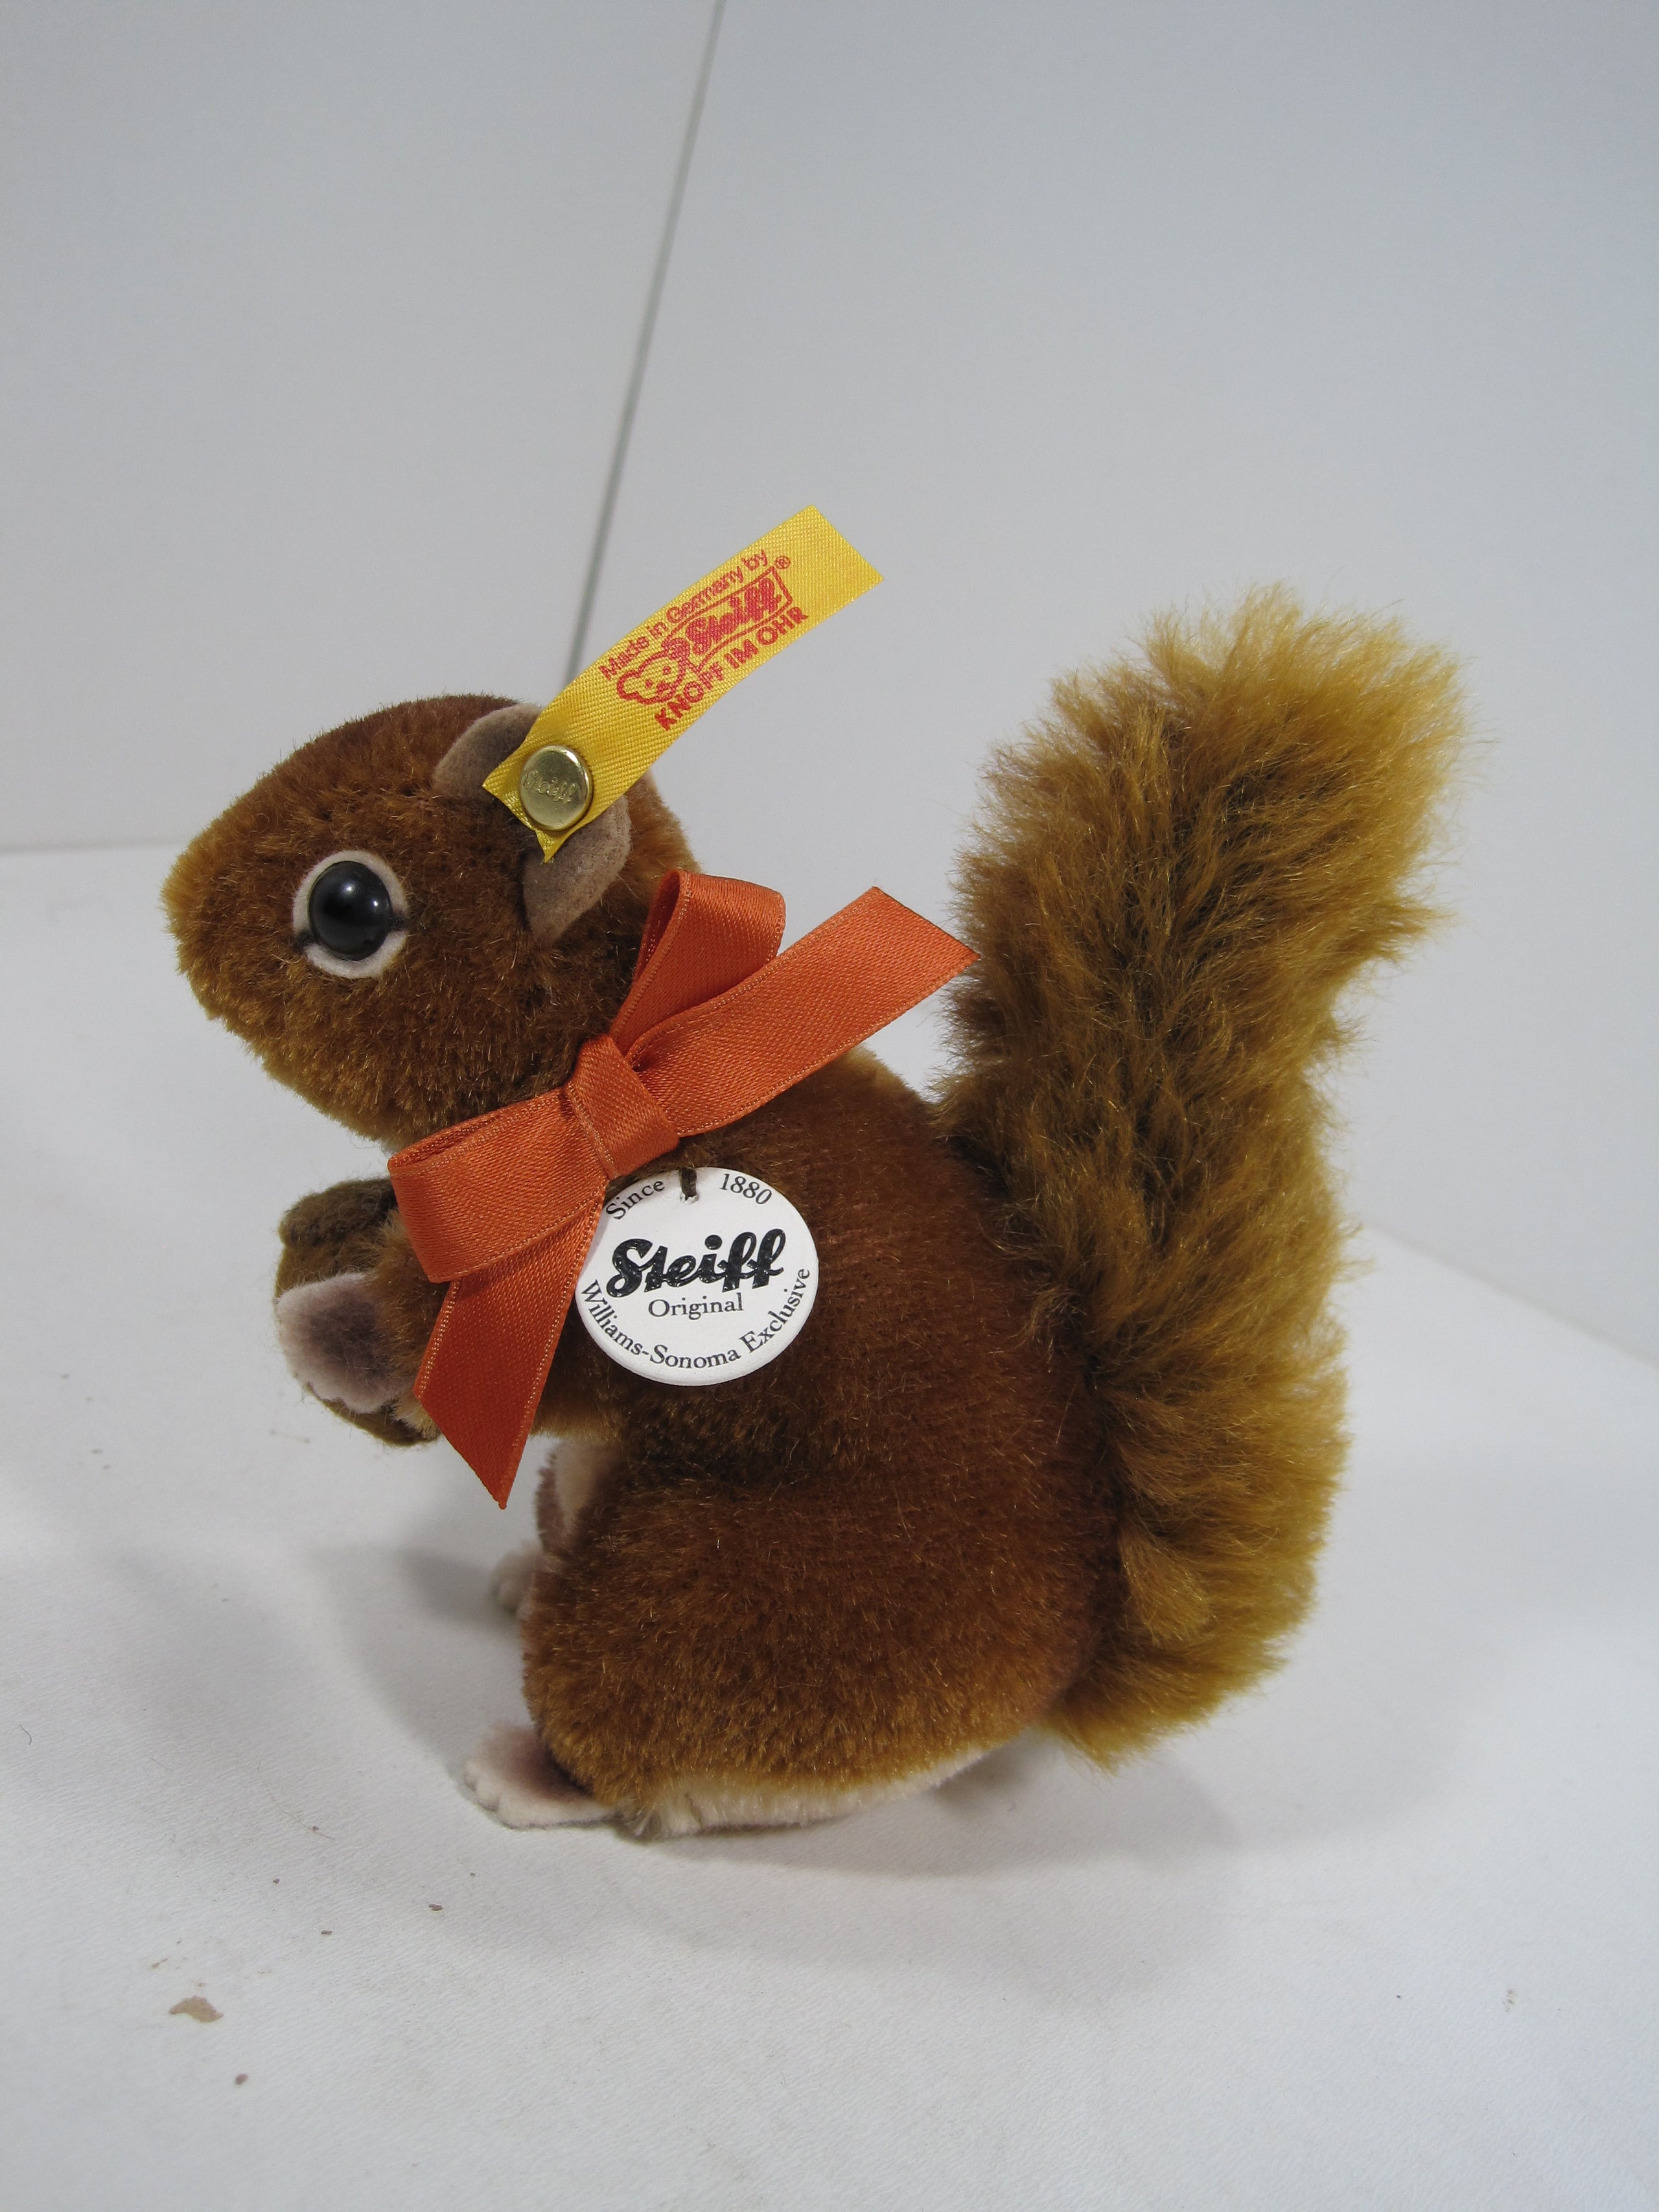 Steiff Mohair Exclusive Squirrel For Williams Sonoma With All IDs